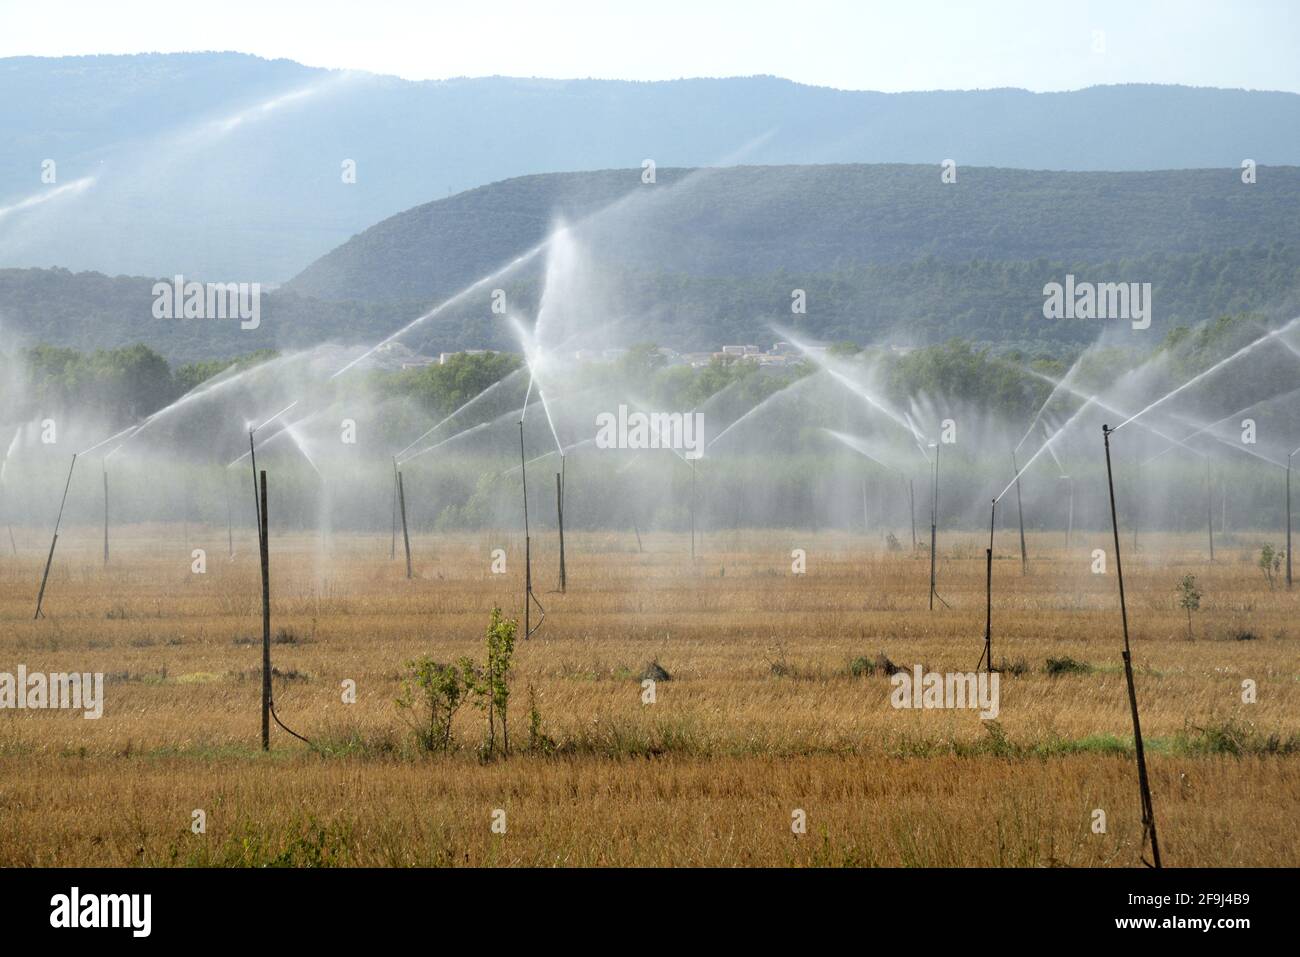 Watering System, Water Sprinklers or Irrigation System Durance Valley Alpes-de-Haute-Provence Provence France Stock Photo